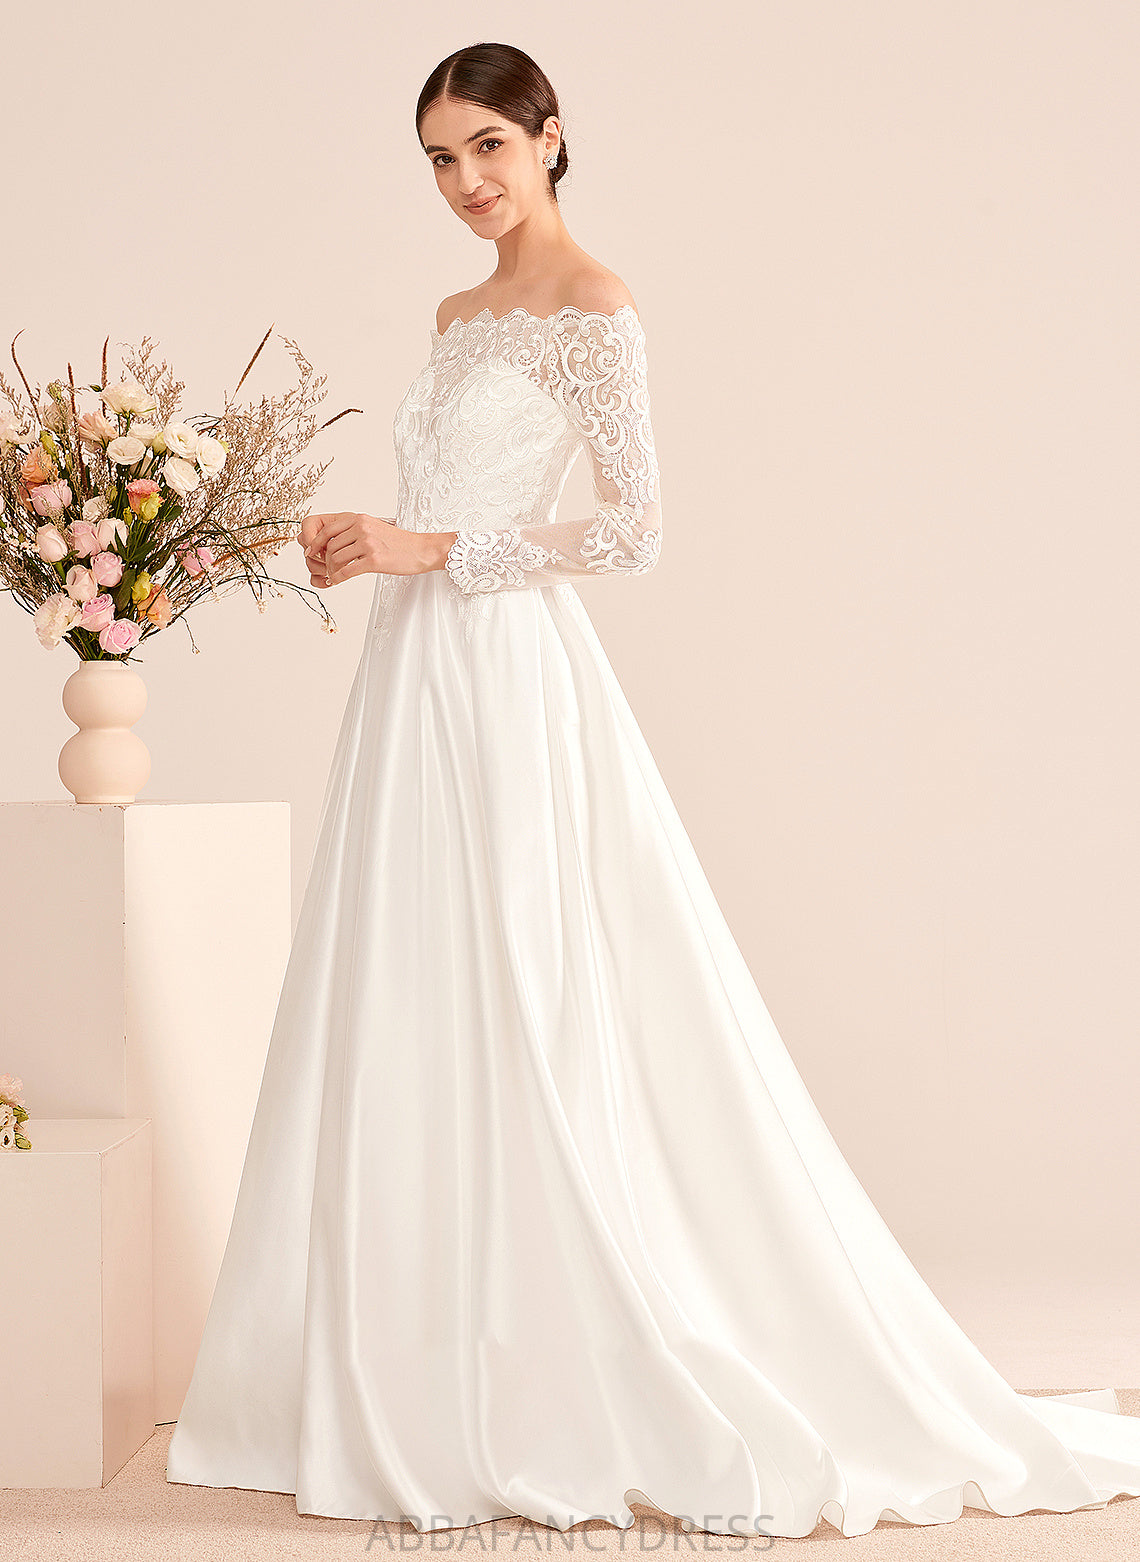 Dress Off-the-Shoulder Lace Ball-Gown/Princess With Wedding Train Wedding Dresses Court Elva